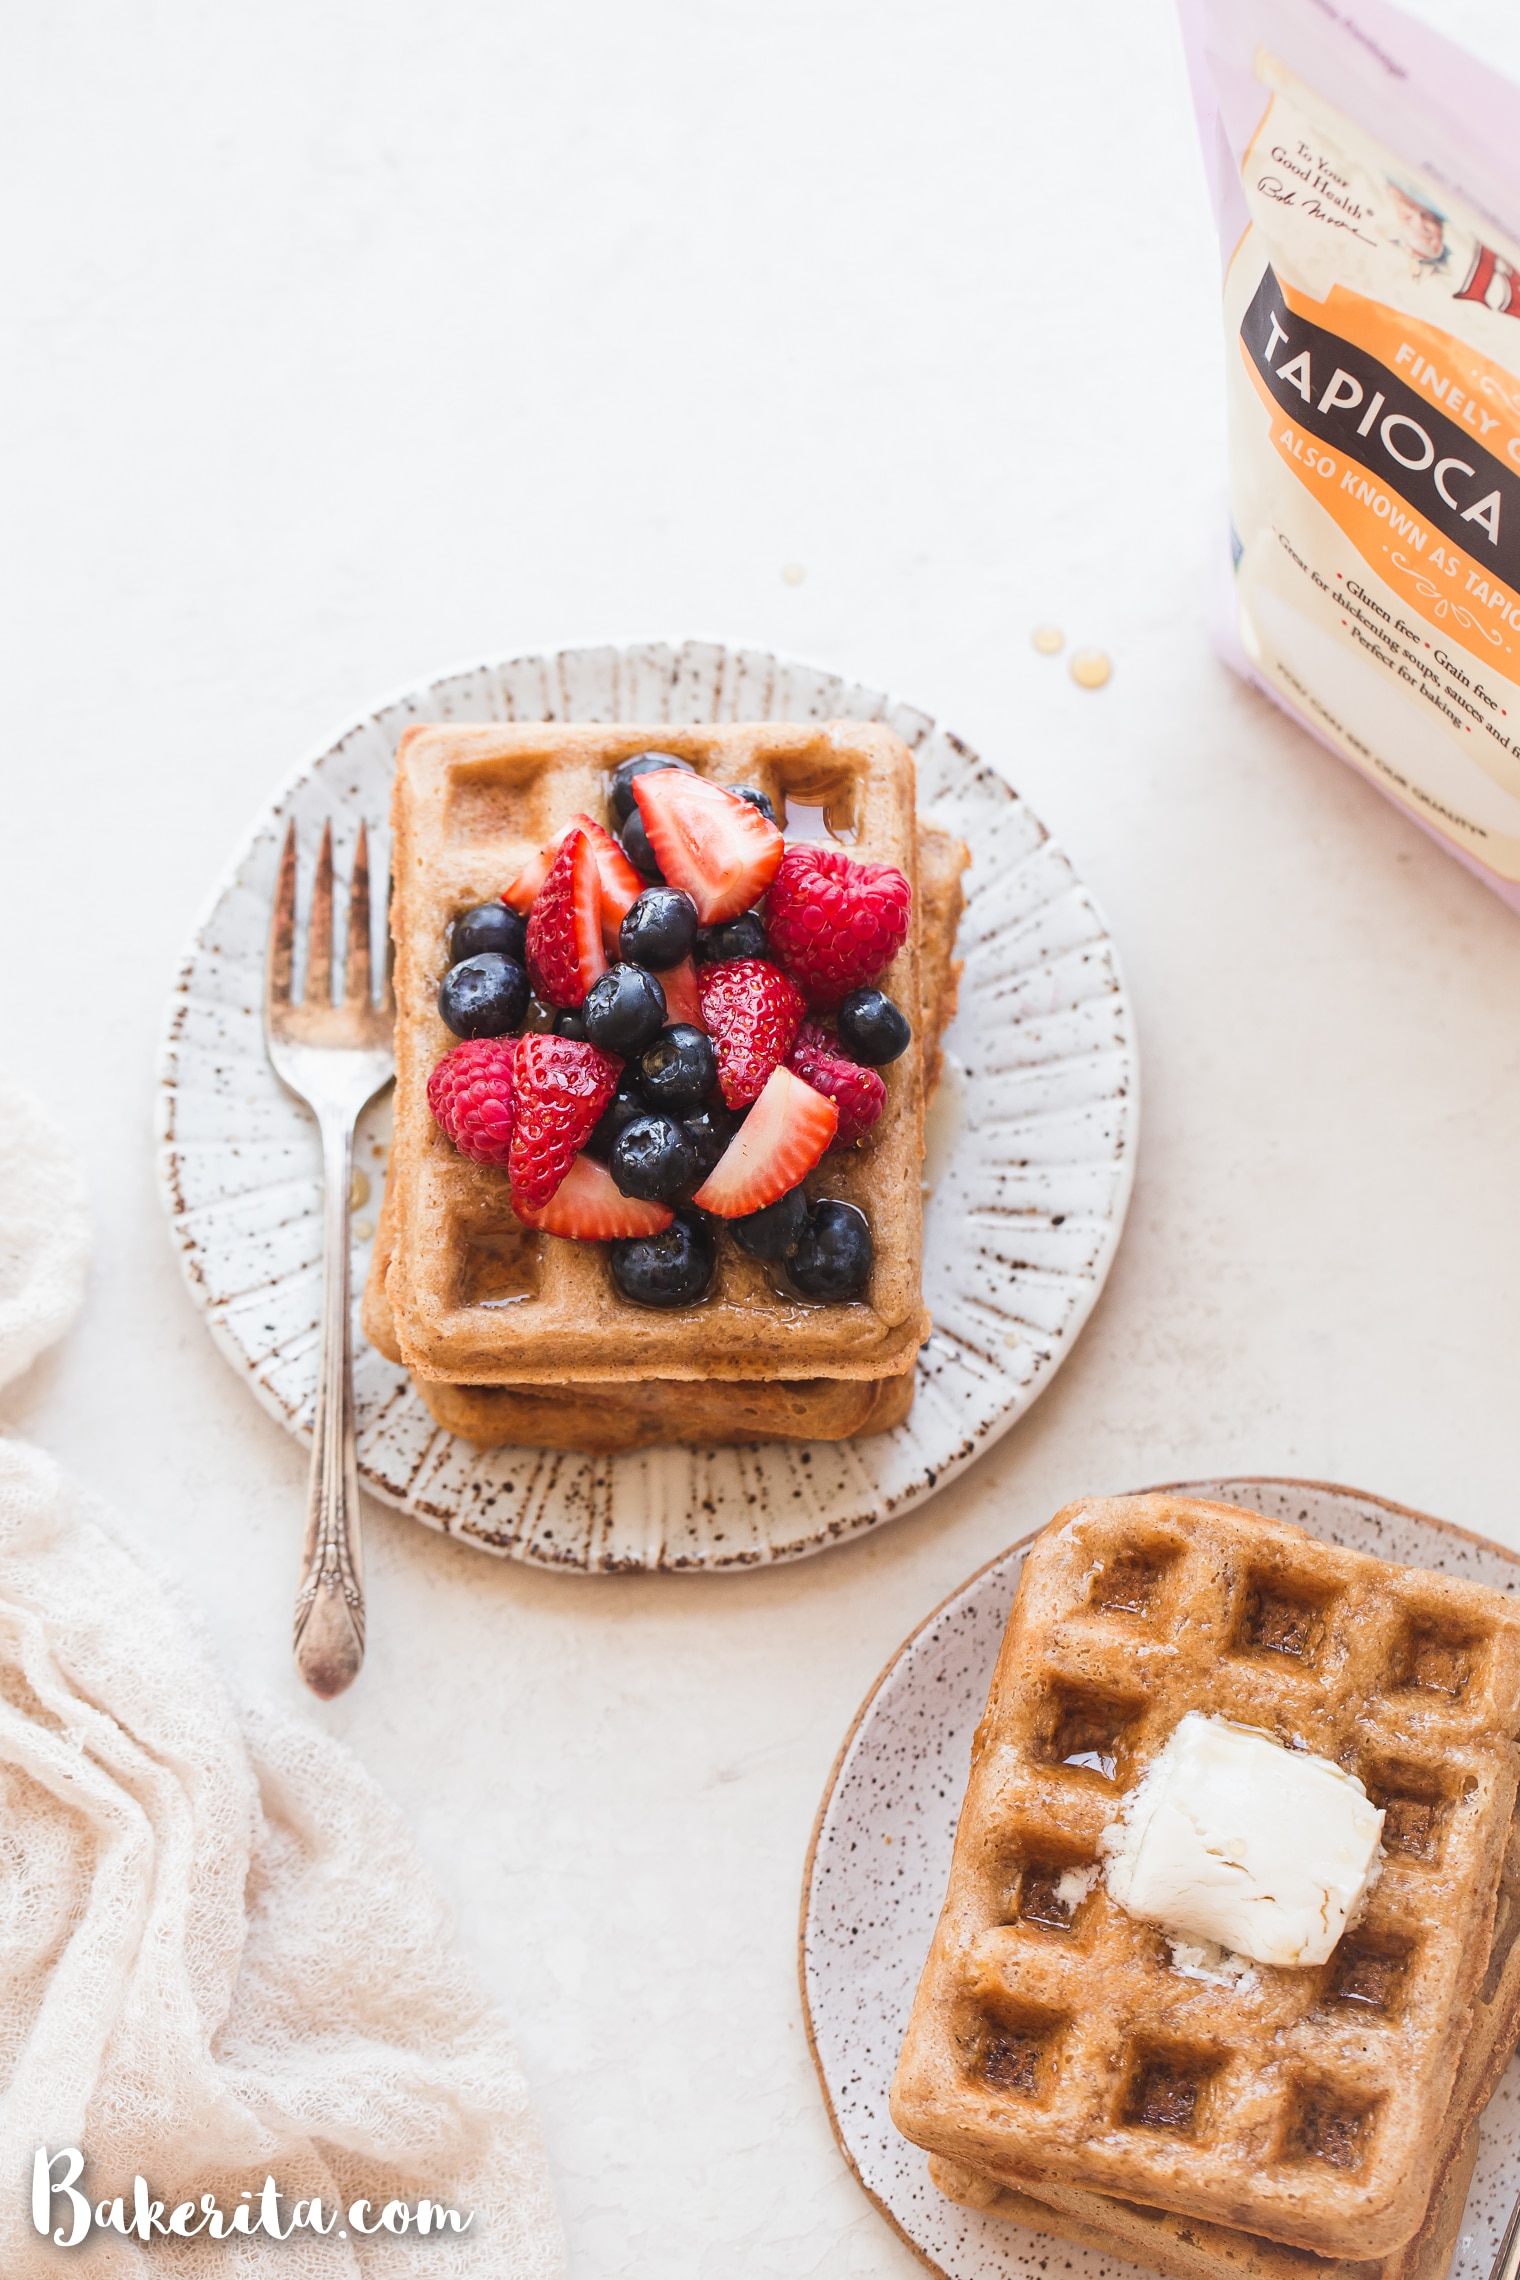 These Paleo Vegan Waffles are incredibly light, crispy, and best of all - easy to make! They're gluten-free, egg-free, and can easily be frozen for a quick breakfast.